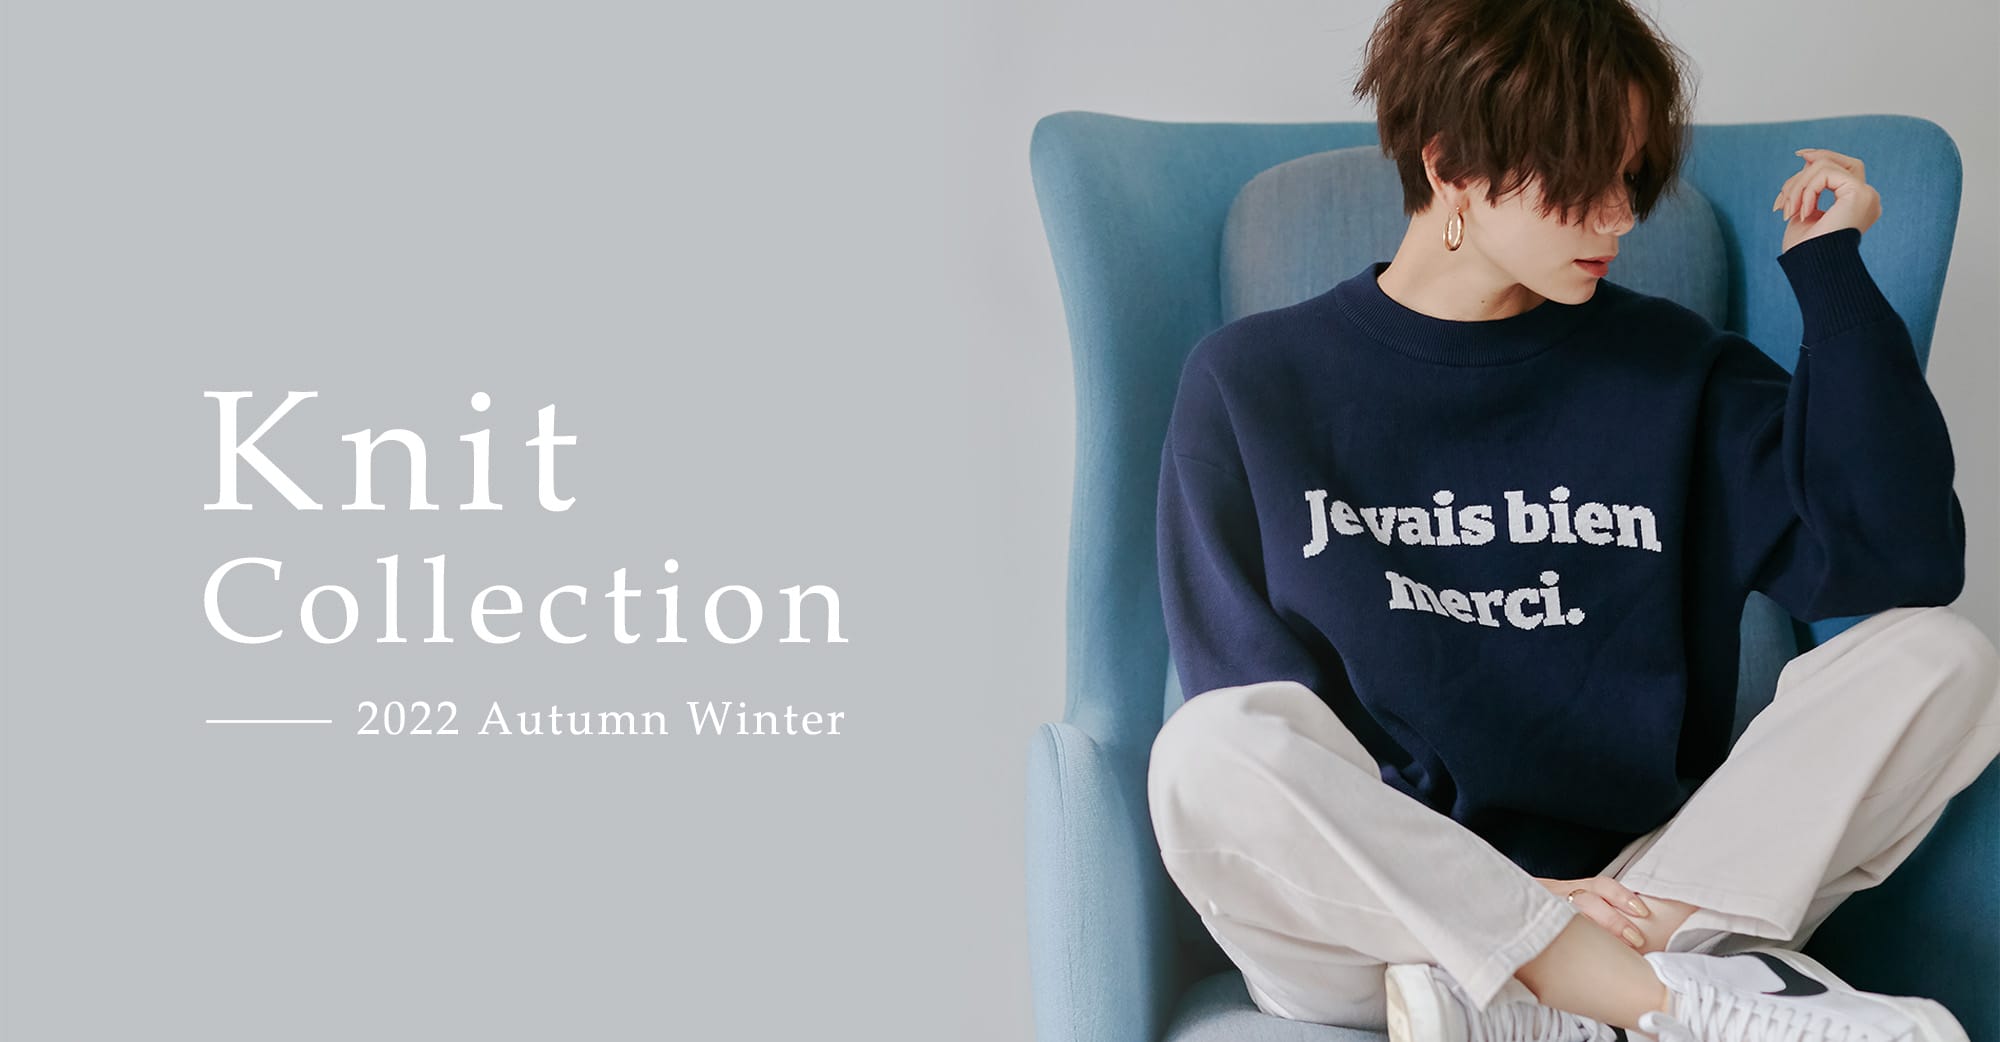 Knit Collection 2022 Autumn Winter